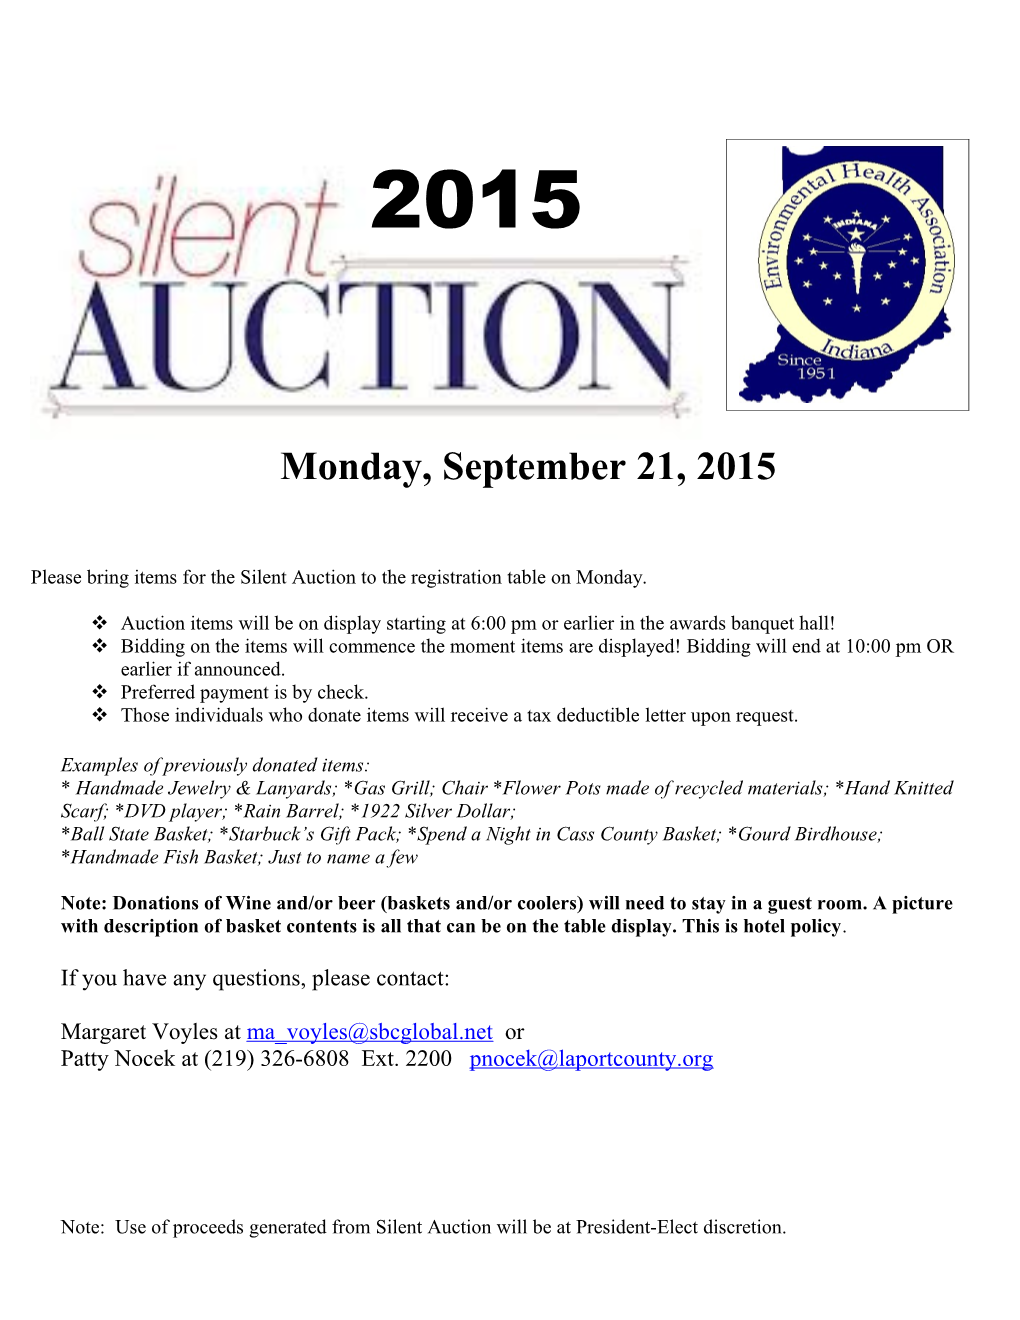 V Auction Items Will Be on Display Starting at 6:00 Pm Or Earlier in the Awards Banquet Hall!